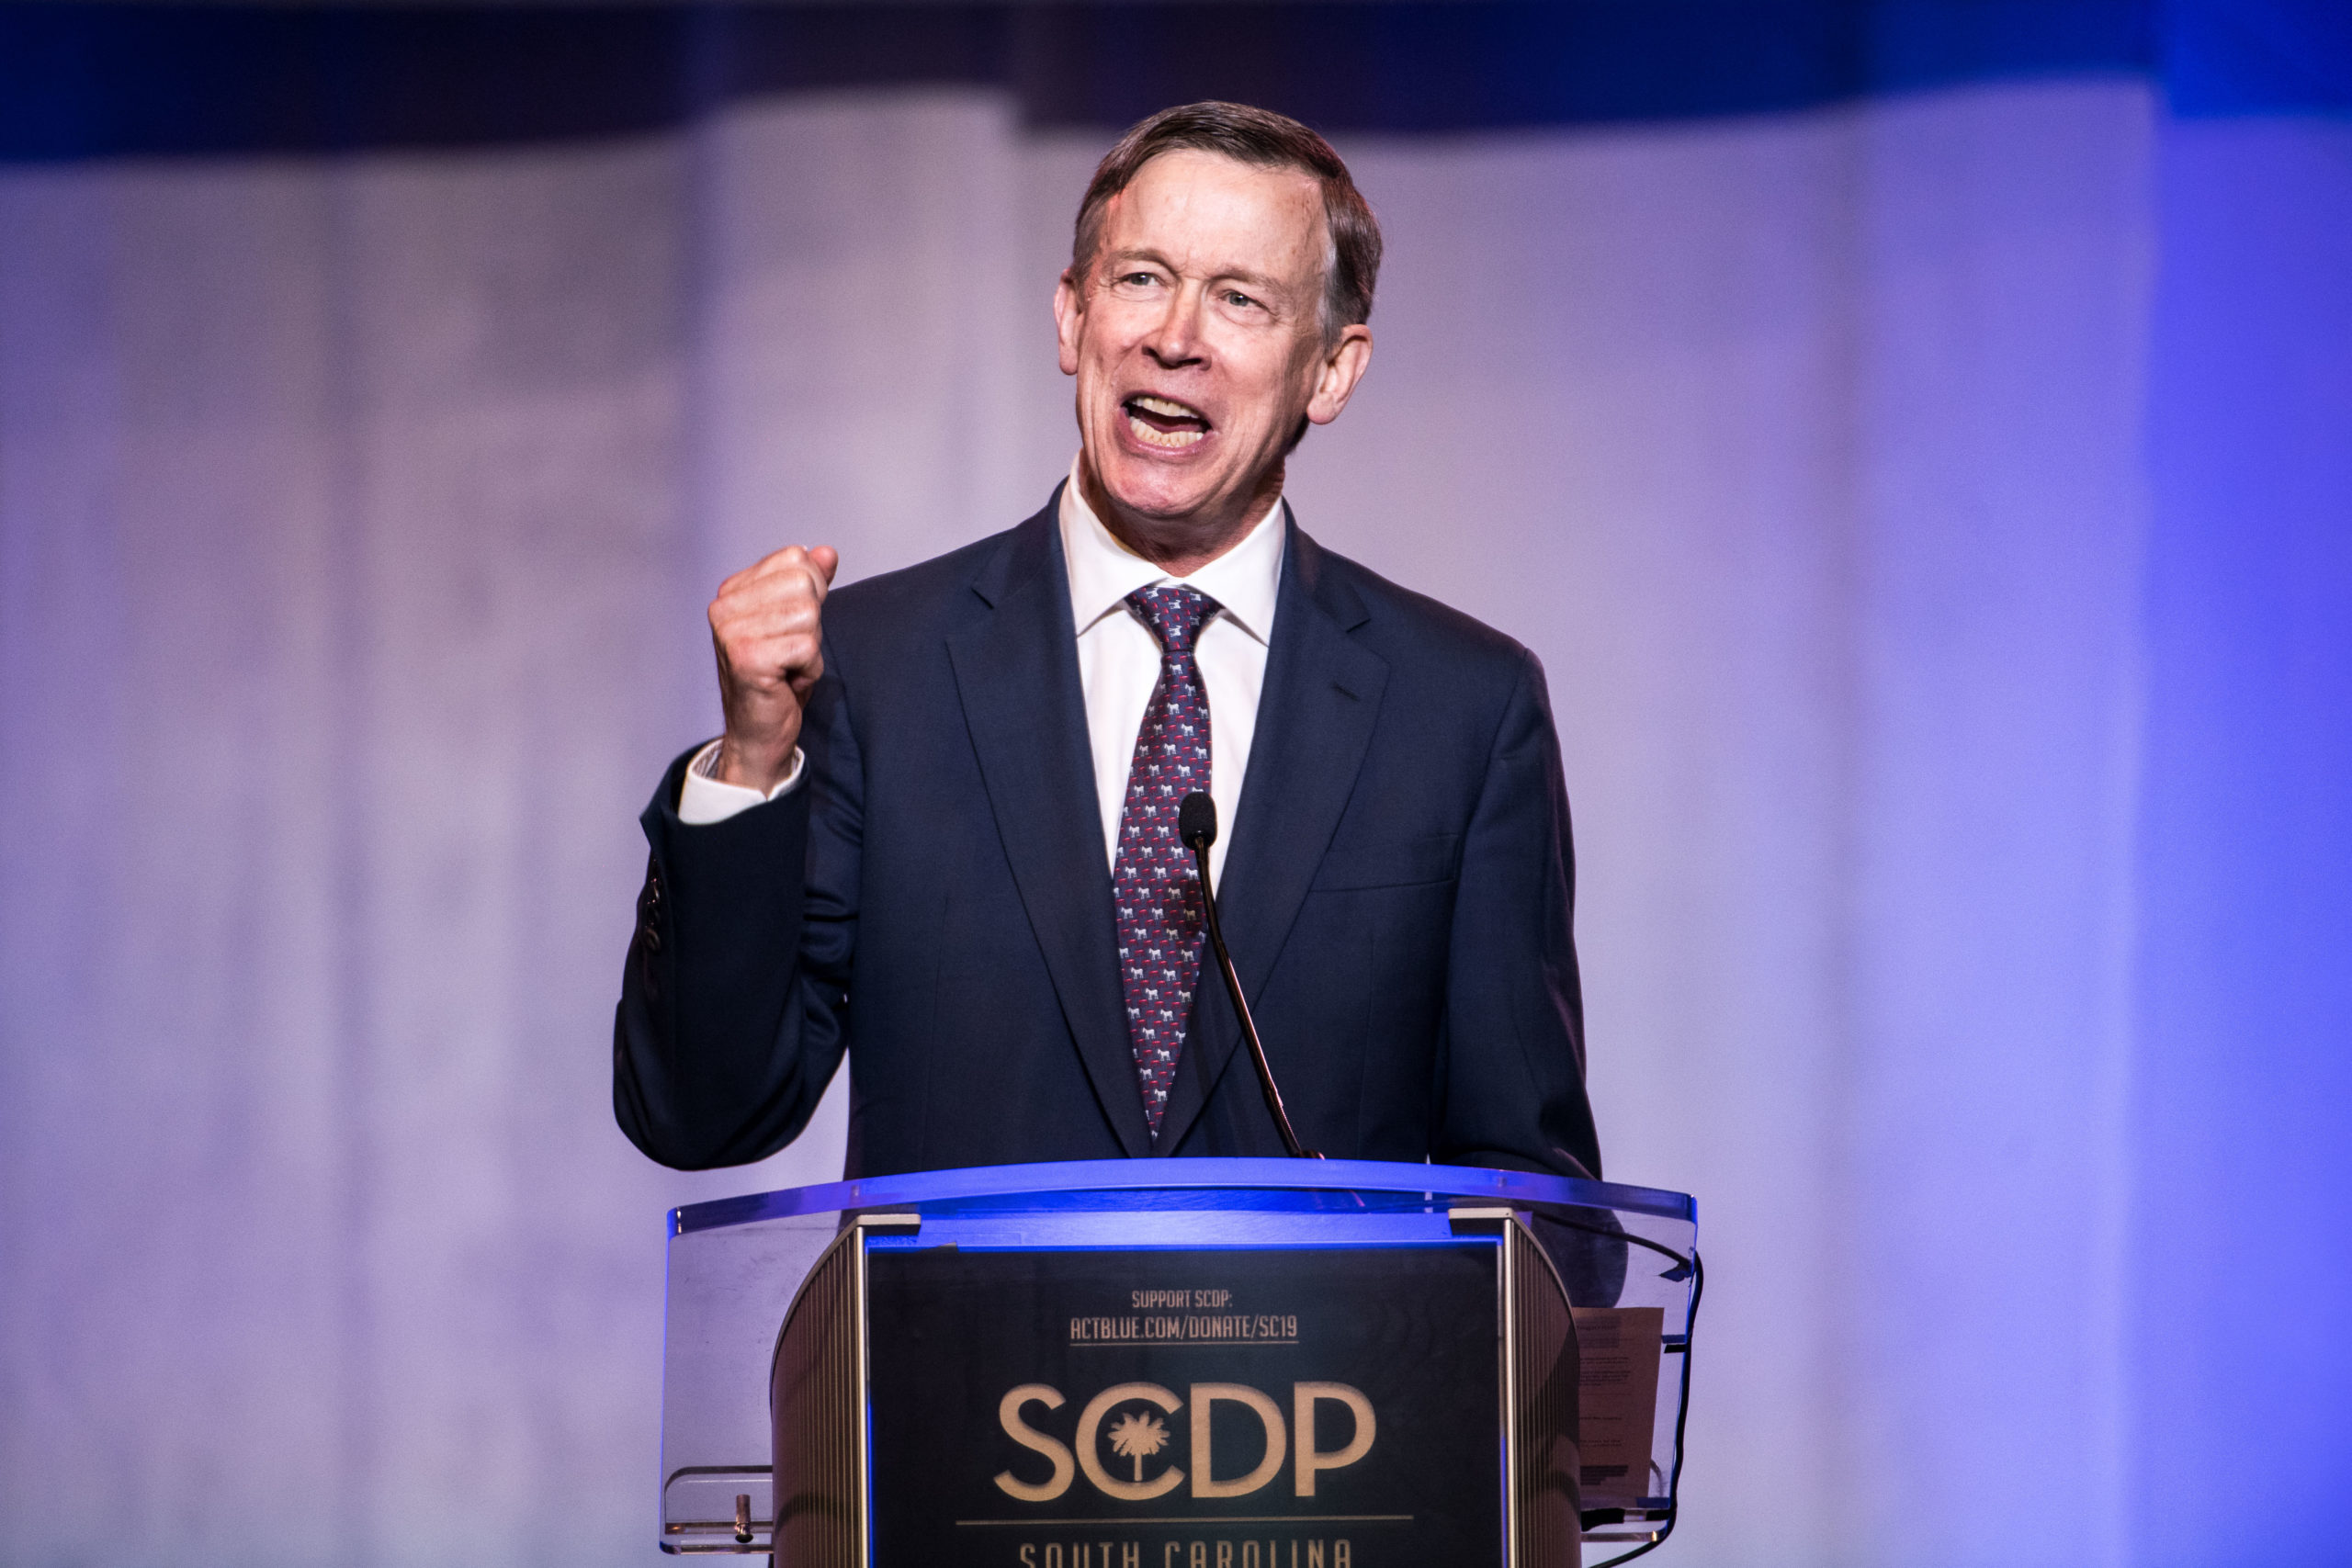 COLUMBIA, SC - JUNE 22: Democratic presidential candidate, former Colorado Governor John Hickenlooper speaks to the crowd during the 2019 South Carolina Democratic Party State Convention on June 22, 2019 in Columbia, South Carolina. Democratic presidential hopefuls are converging on South Carolina this weekend for a host of events where the candidates can directly address an important voting bloc in the Democratic primary. (Photo by Sean Rayford/Getty Images)